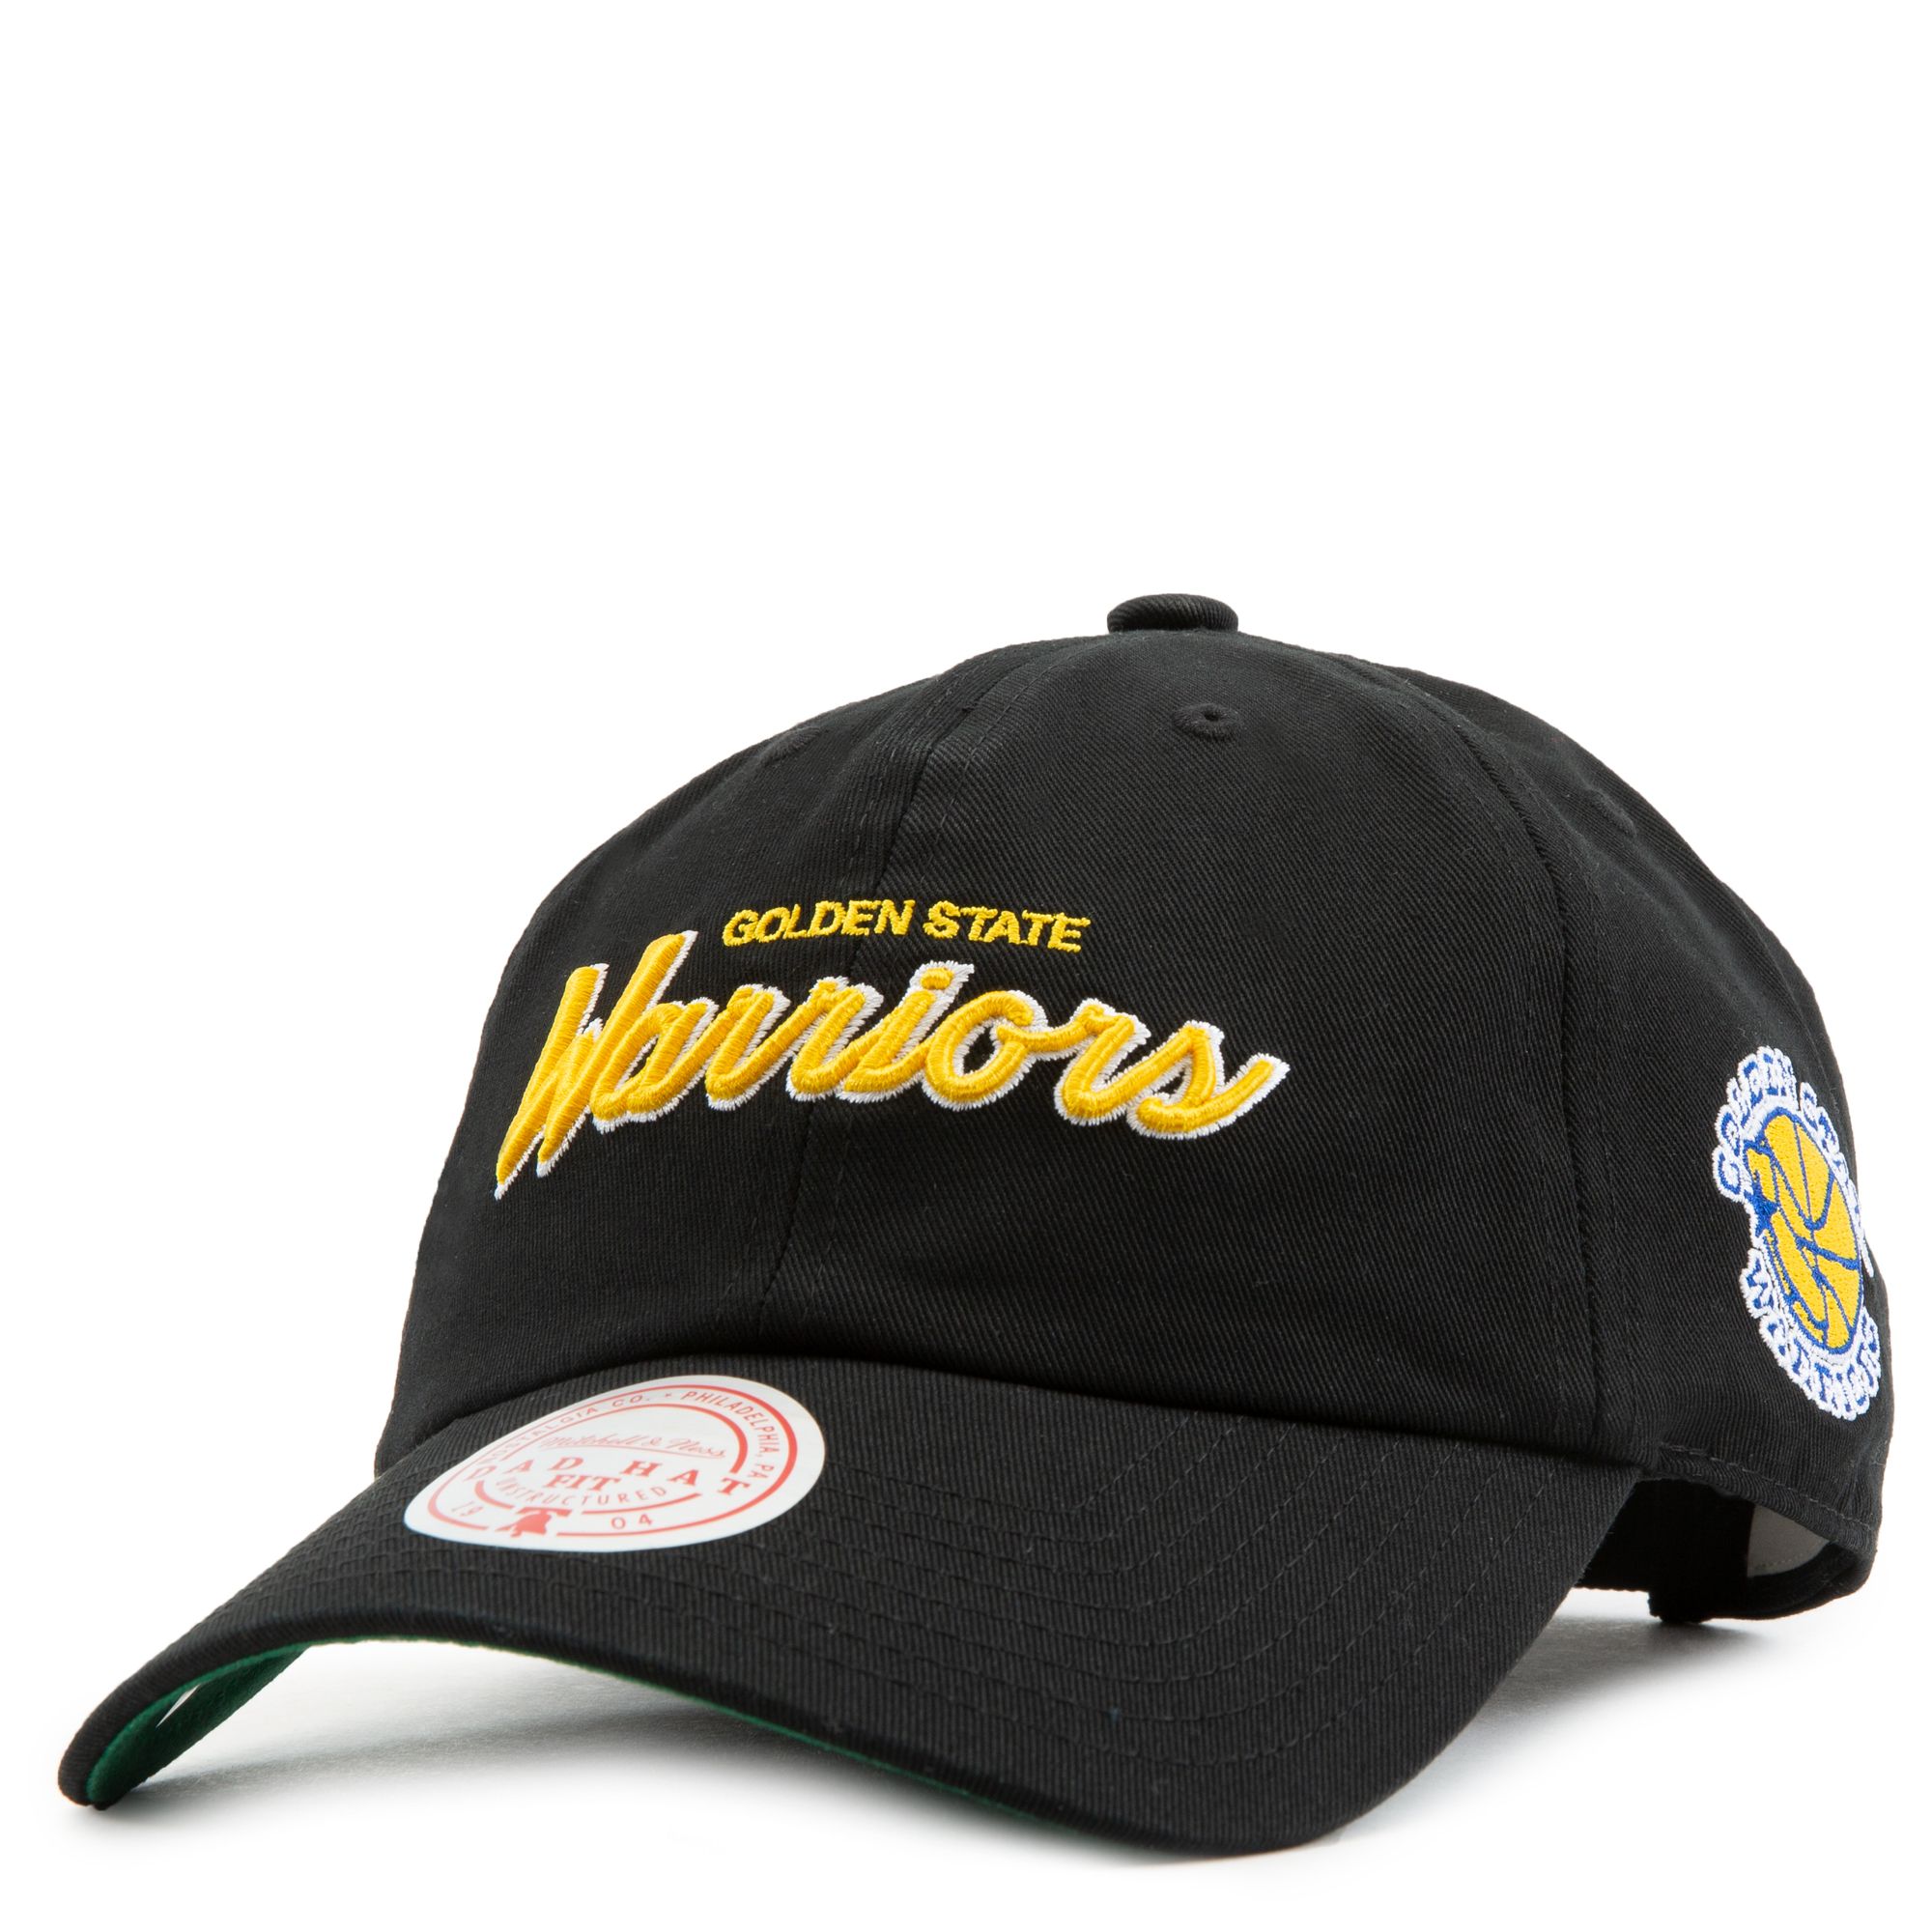 🏀Golden State Warriors Mitchell & Ness Vintage Special Script Snapback  Hat NBA